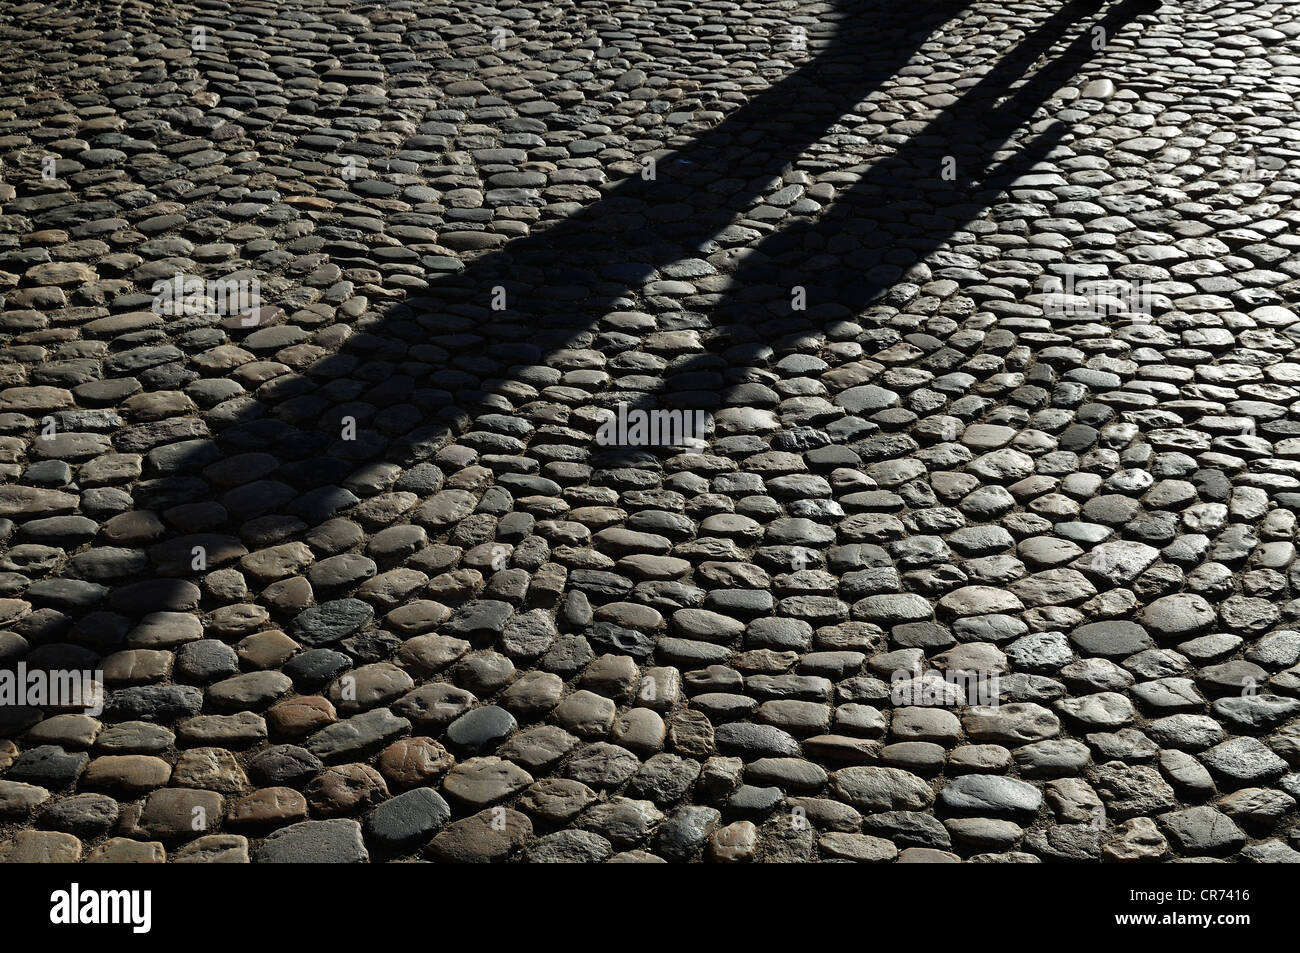 Shadow of an adult and child on cobbles, Freiburg, Baden-Wuerttemberg, Germany, Europe Stock Photo